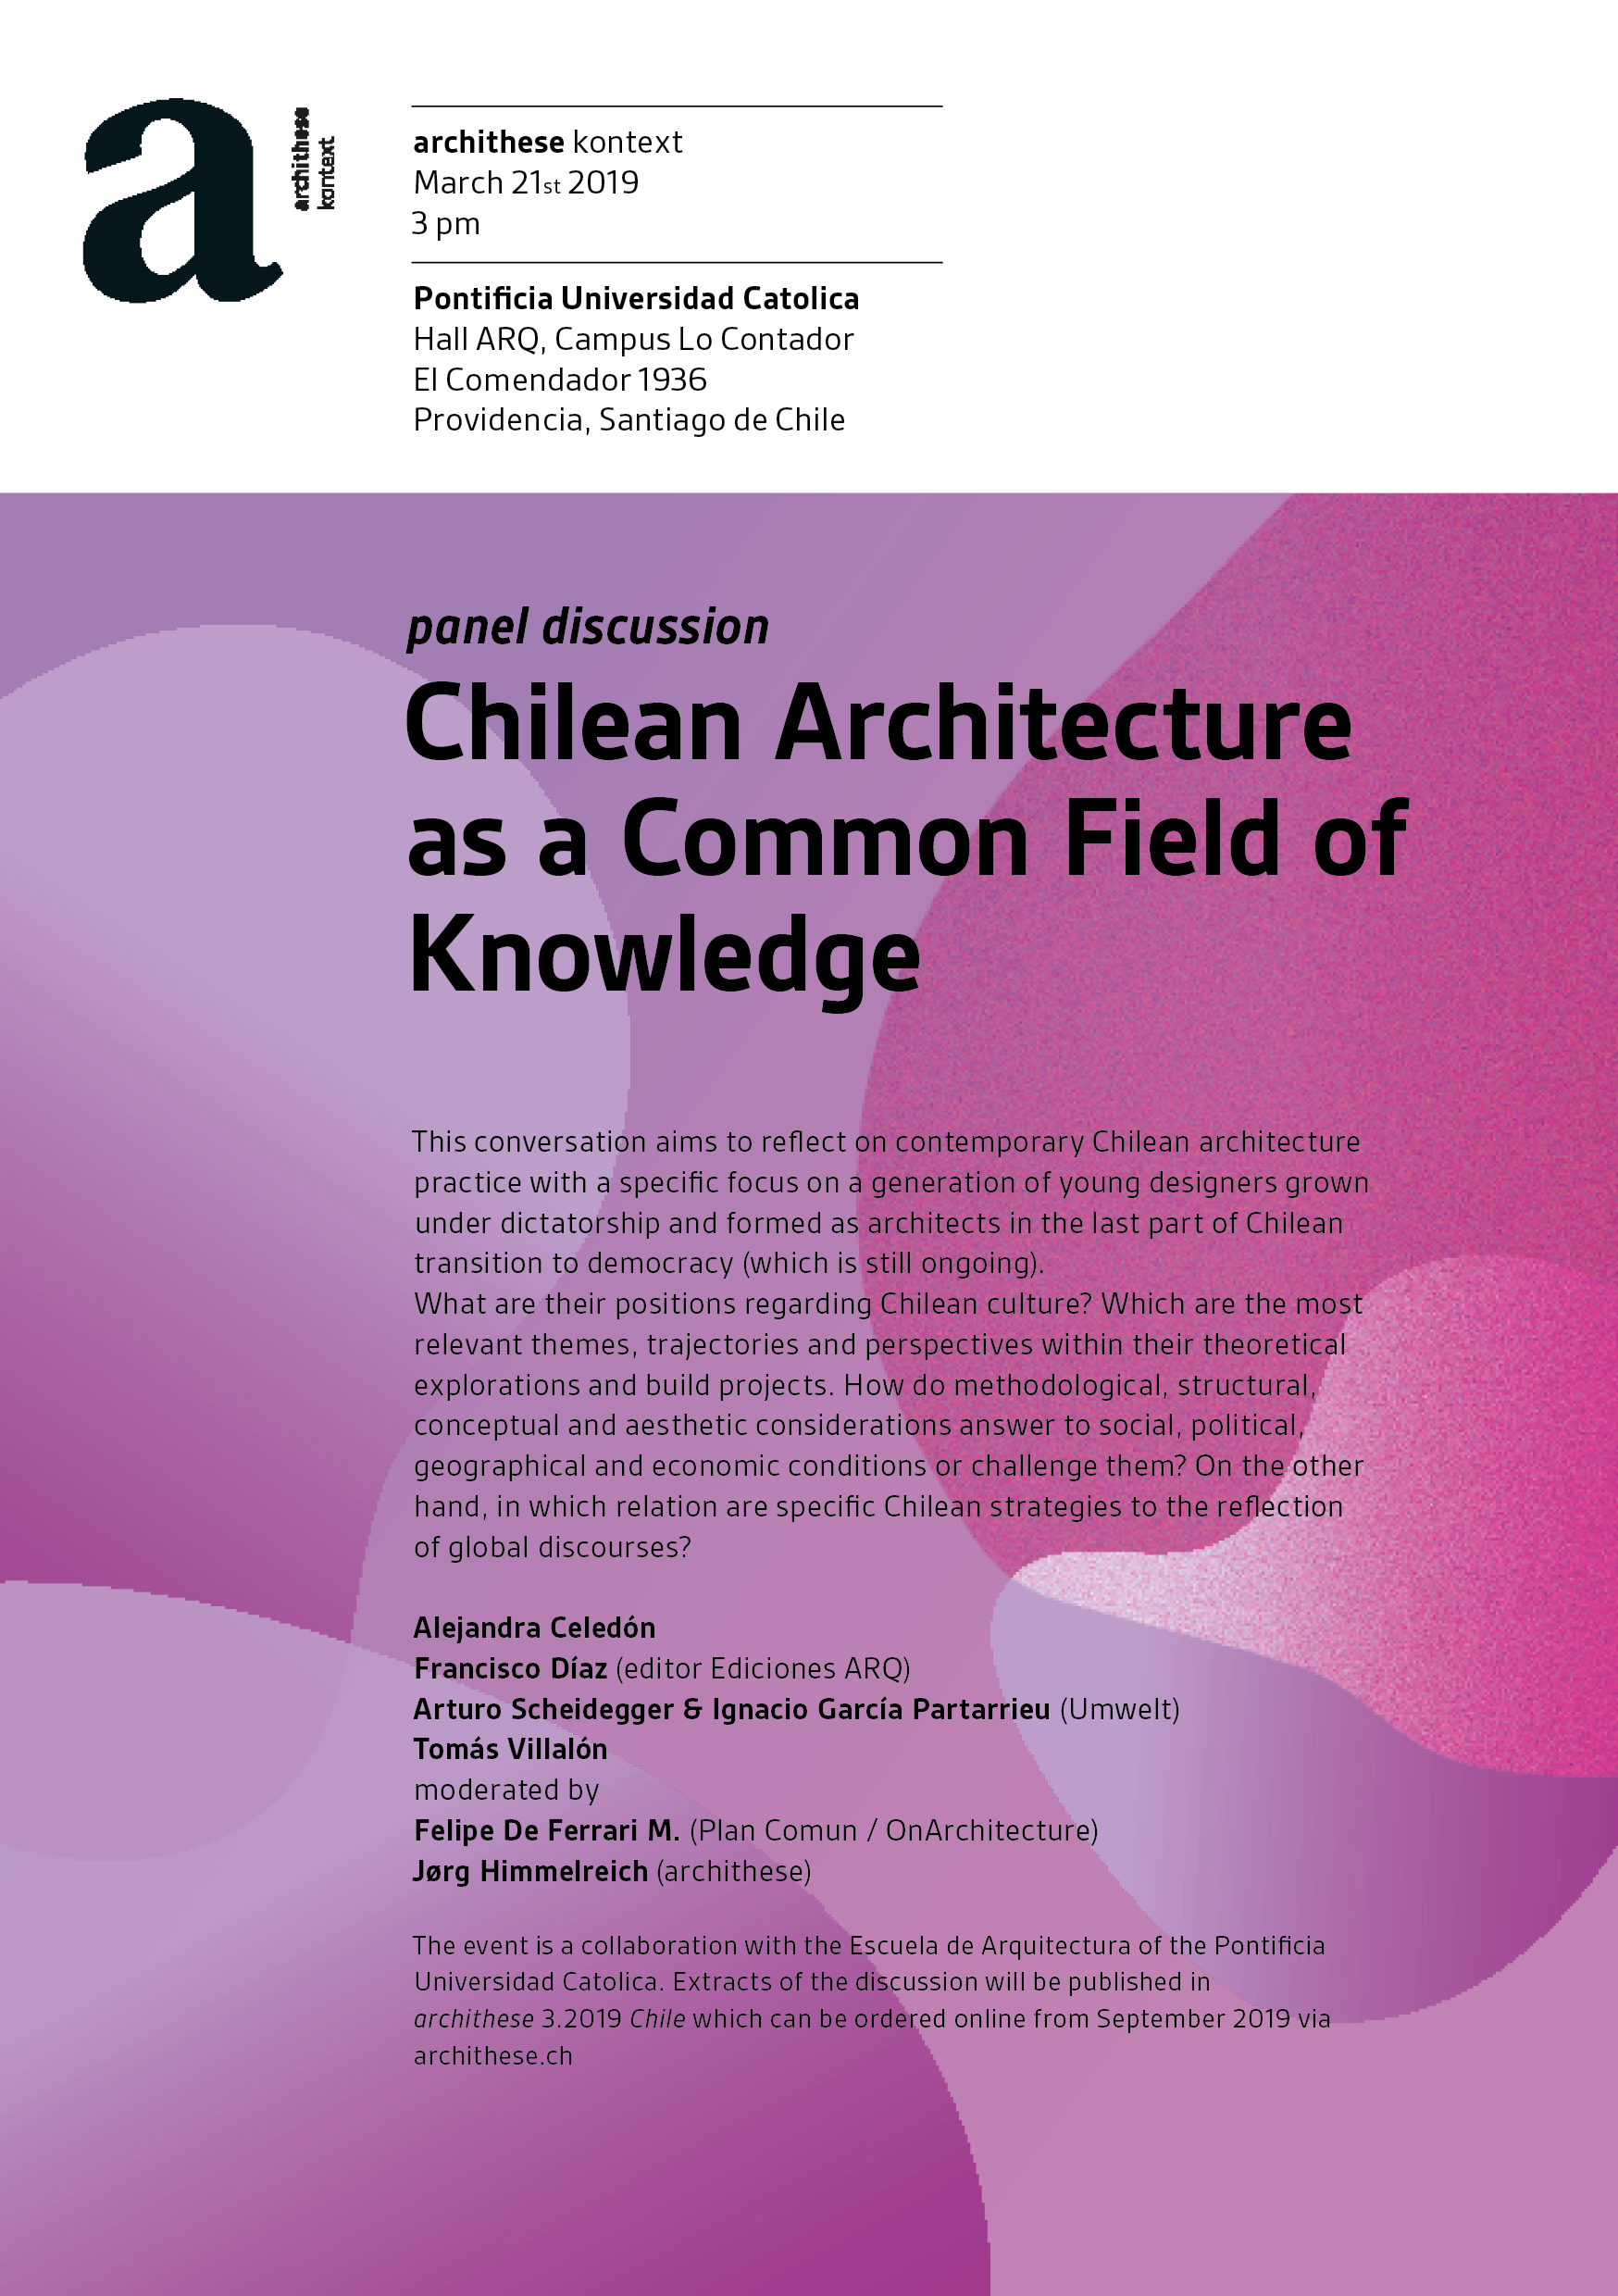 19-03-21_panel_discussion_Chilean_Architecture_as_a_Common_Field_of_Knowledge_2.png